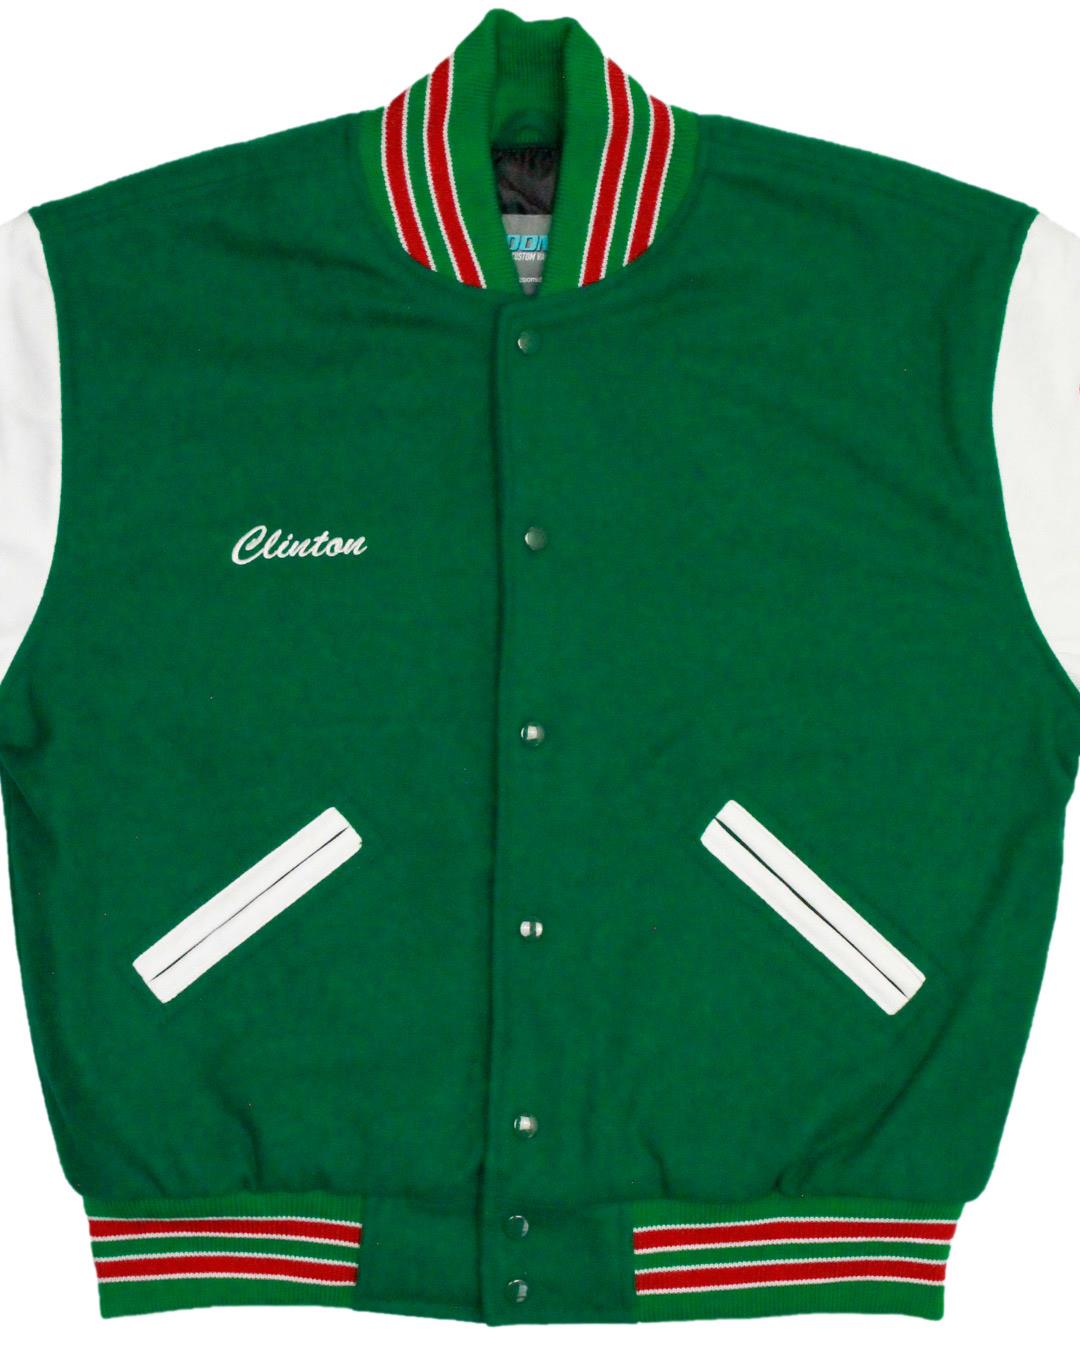 O'Bannon High School Greenwaves Letterman Jacket, Greenville, MS - Front